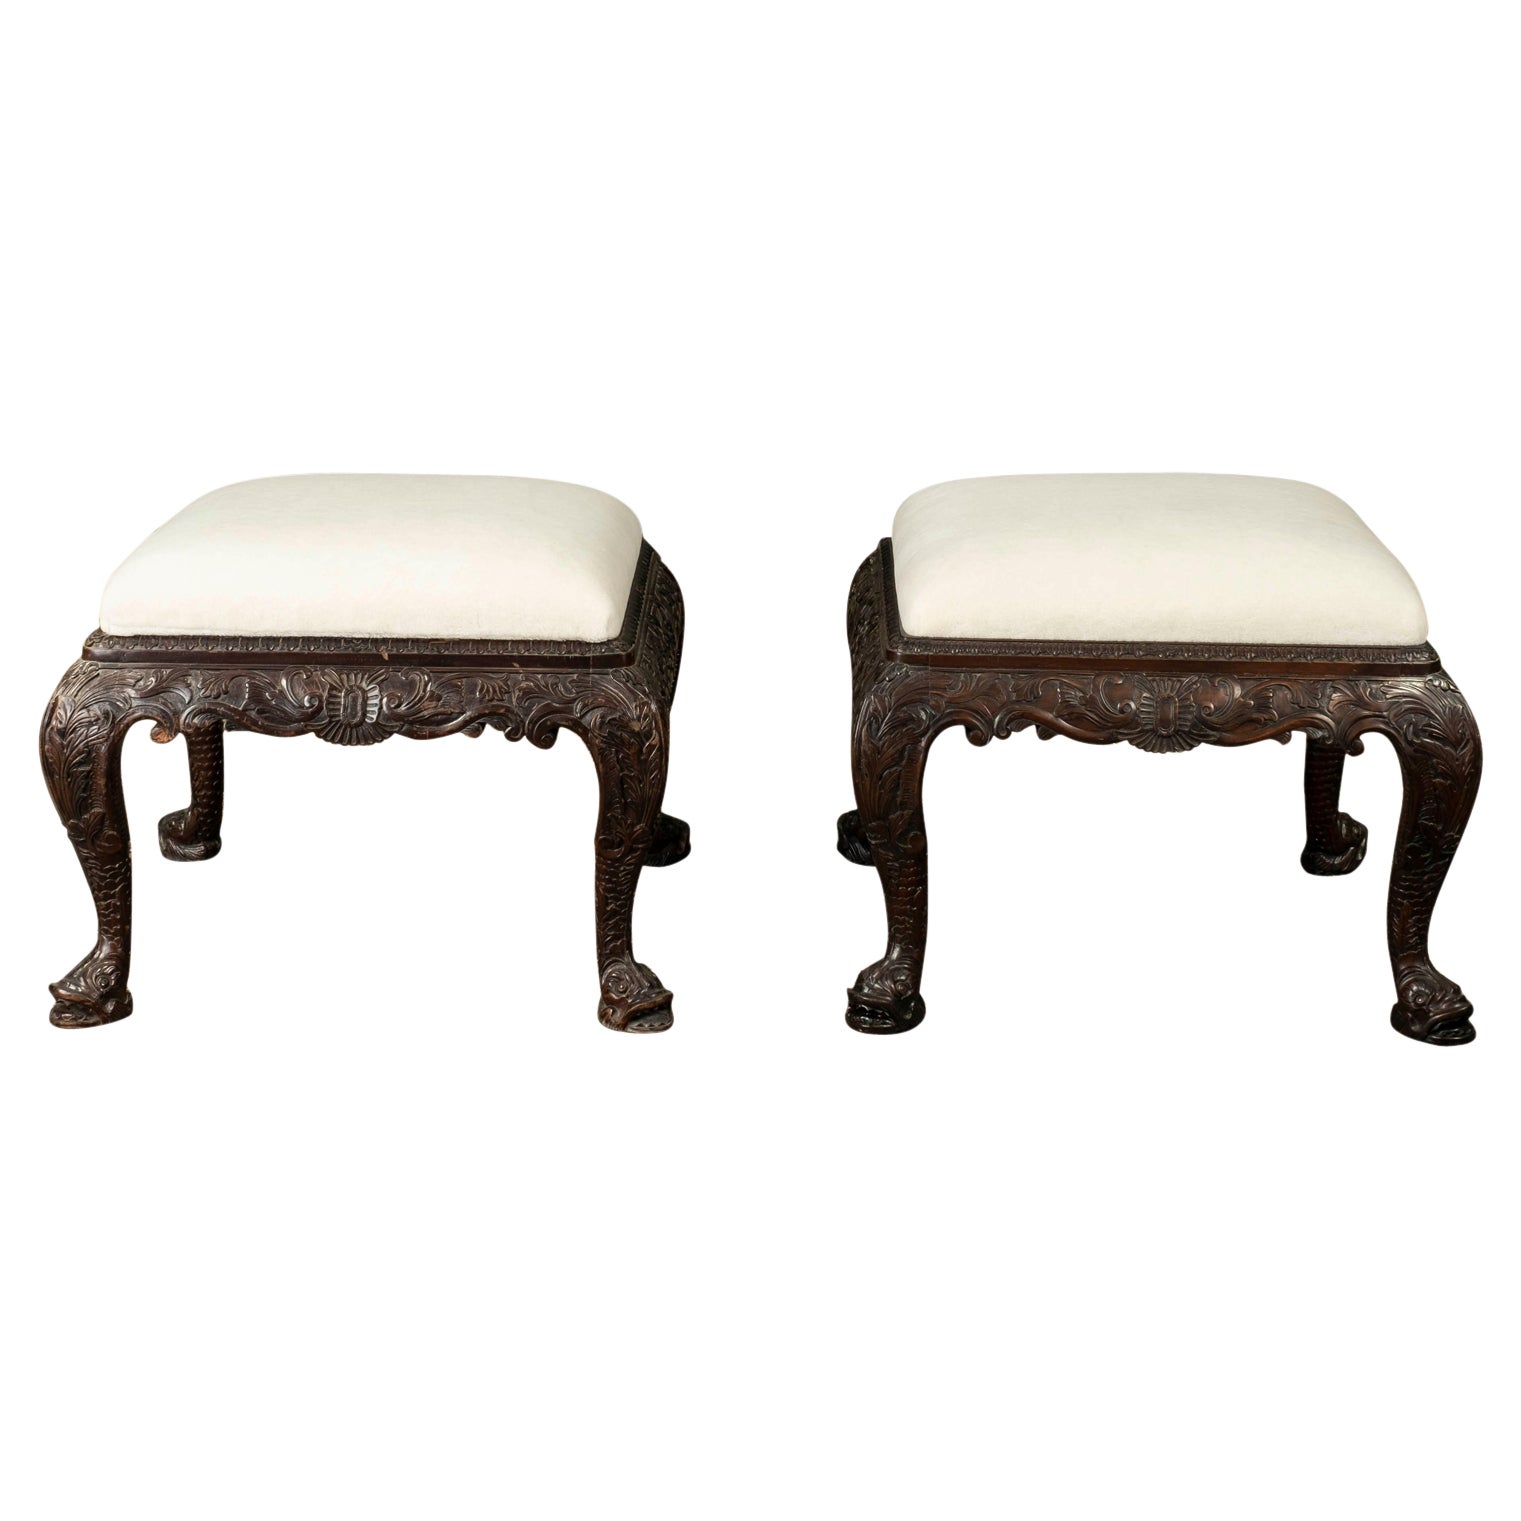 Pair of Antique Regency Style Walnut Ottomans or Benches